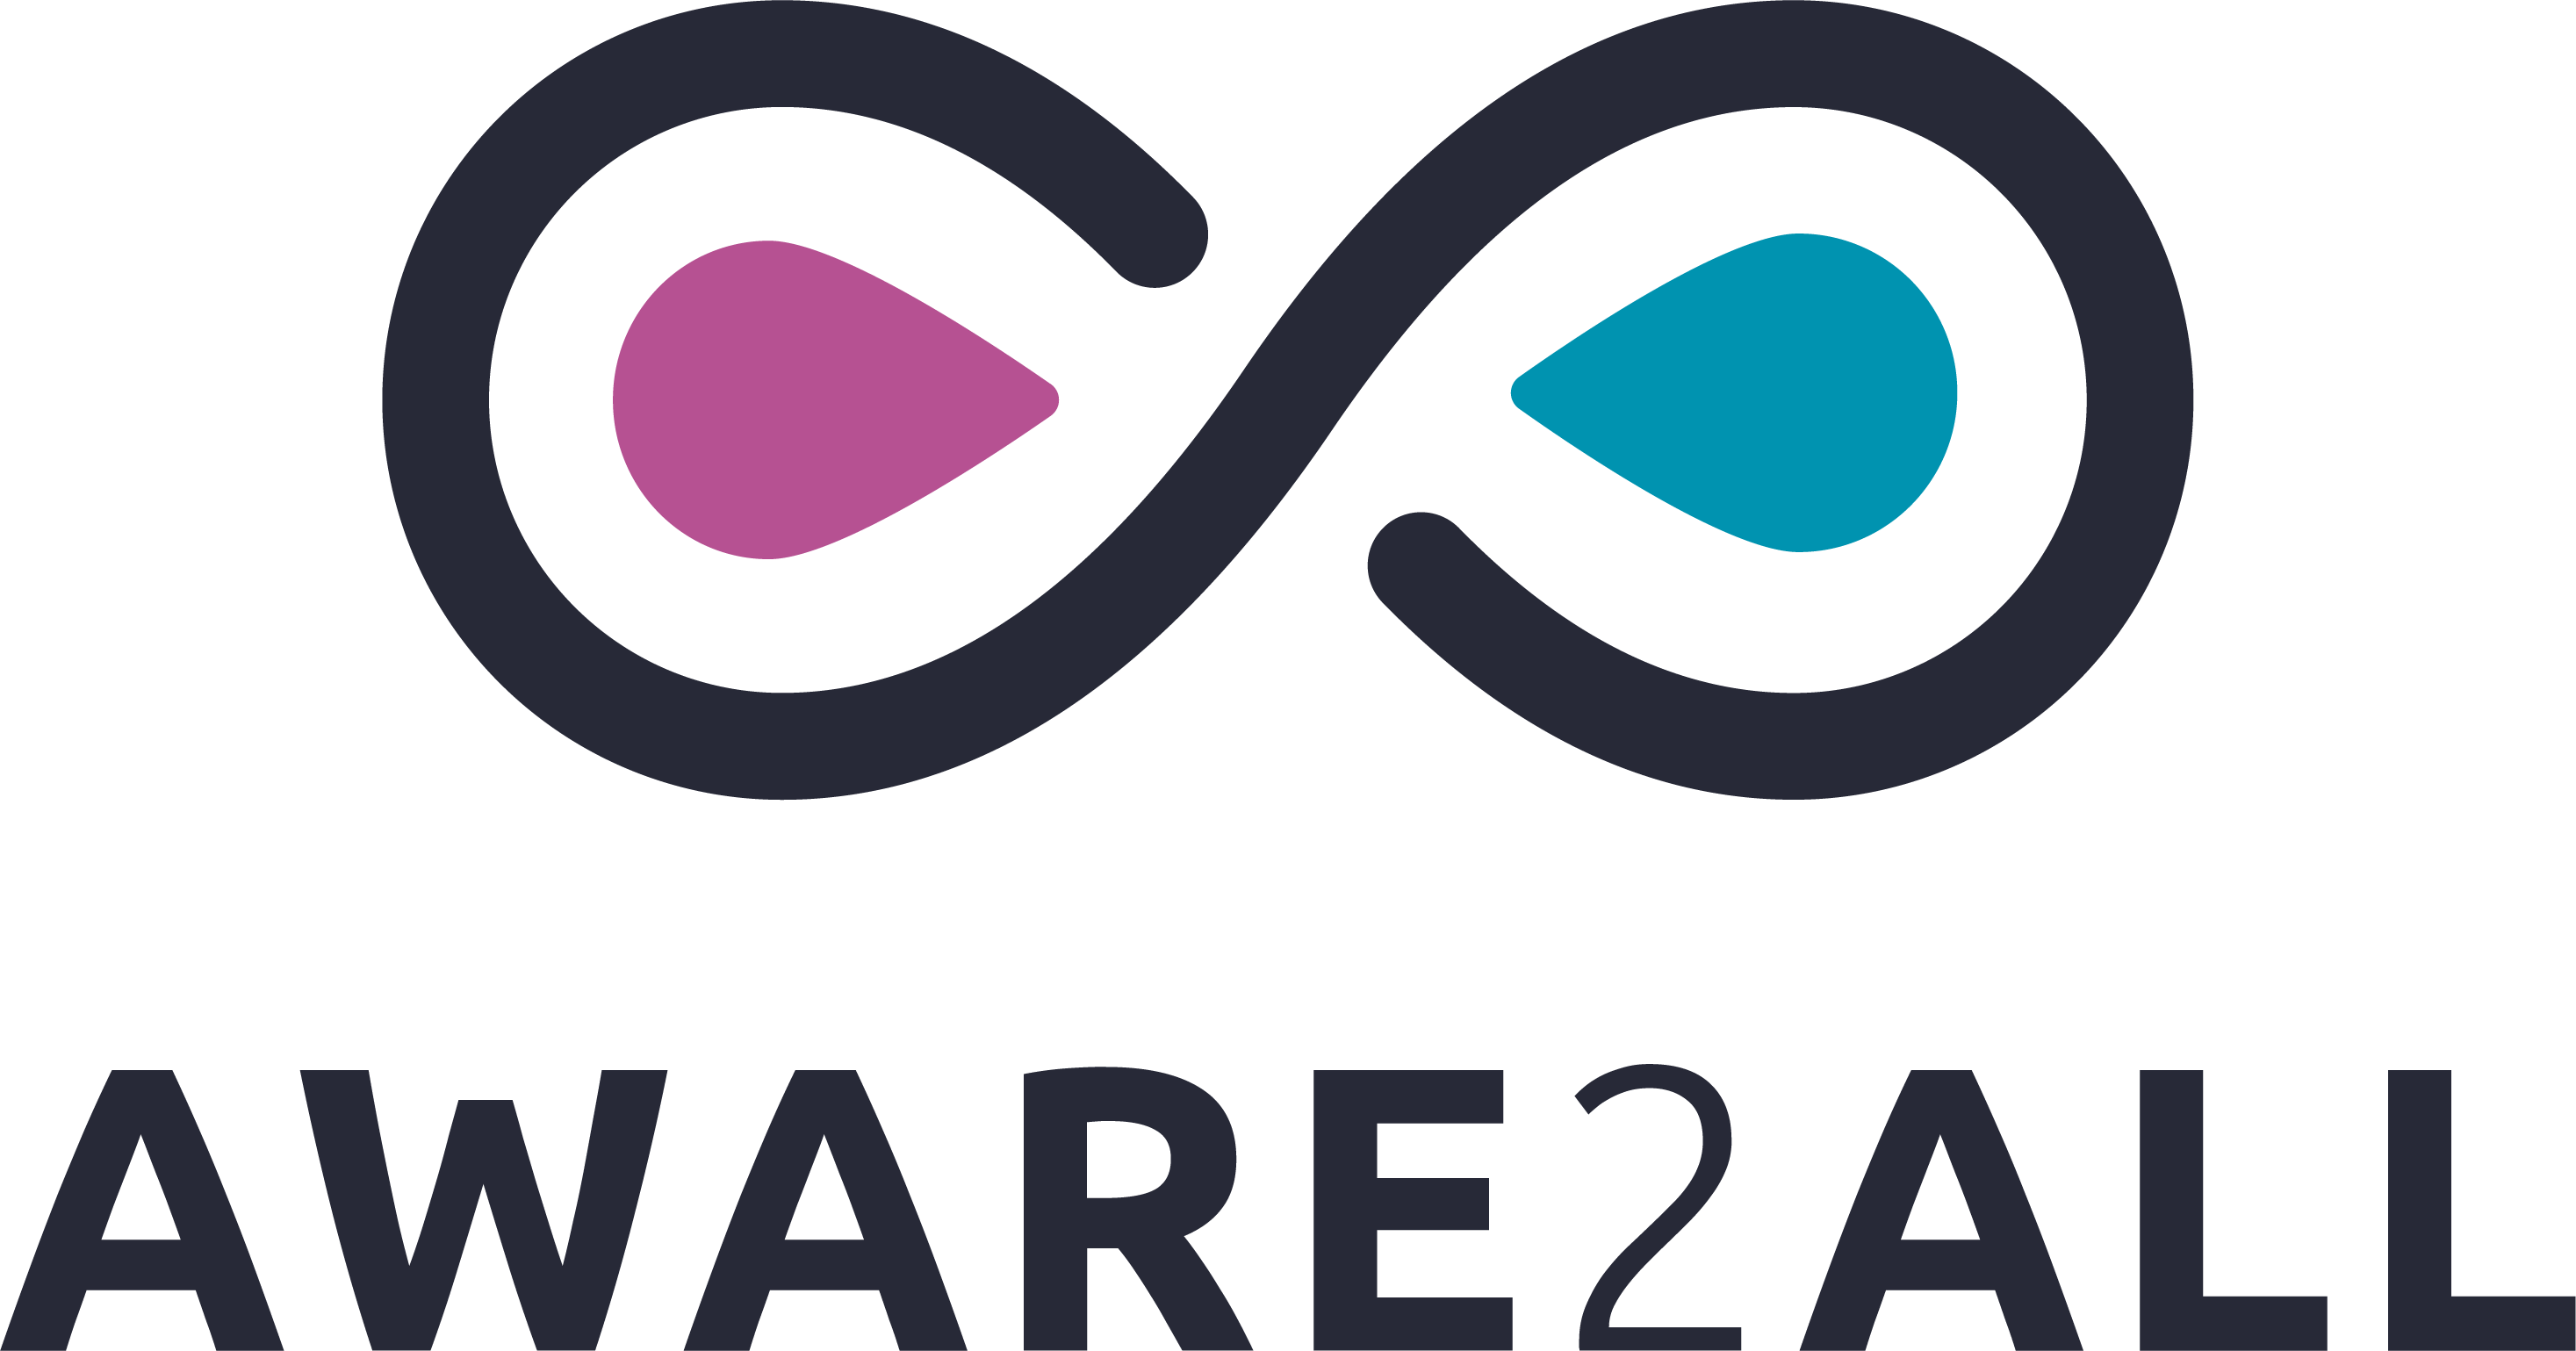 AWARE2ALL defined the Use Cases for its Demonstrators